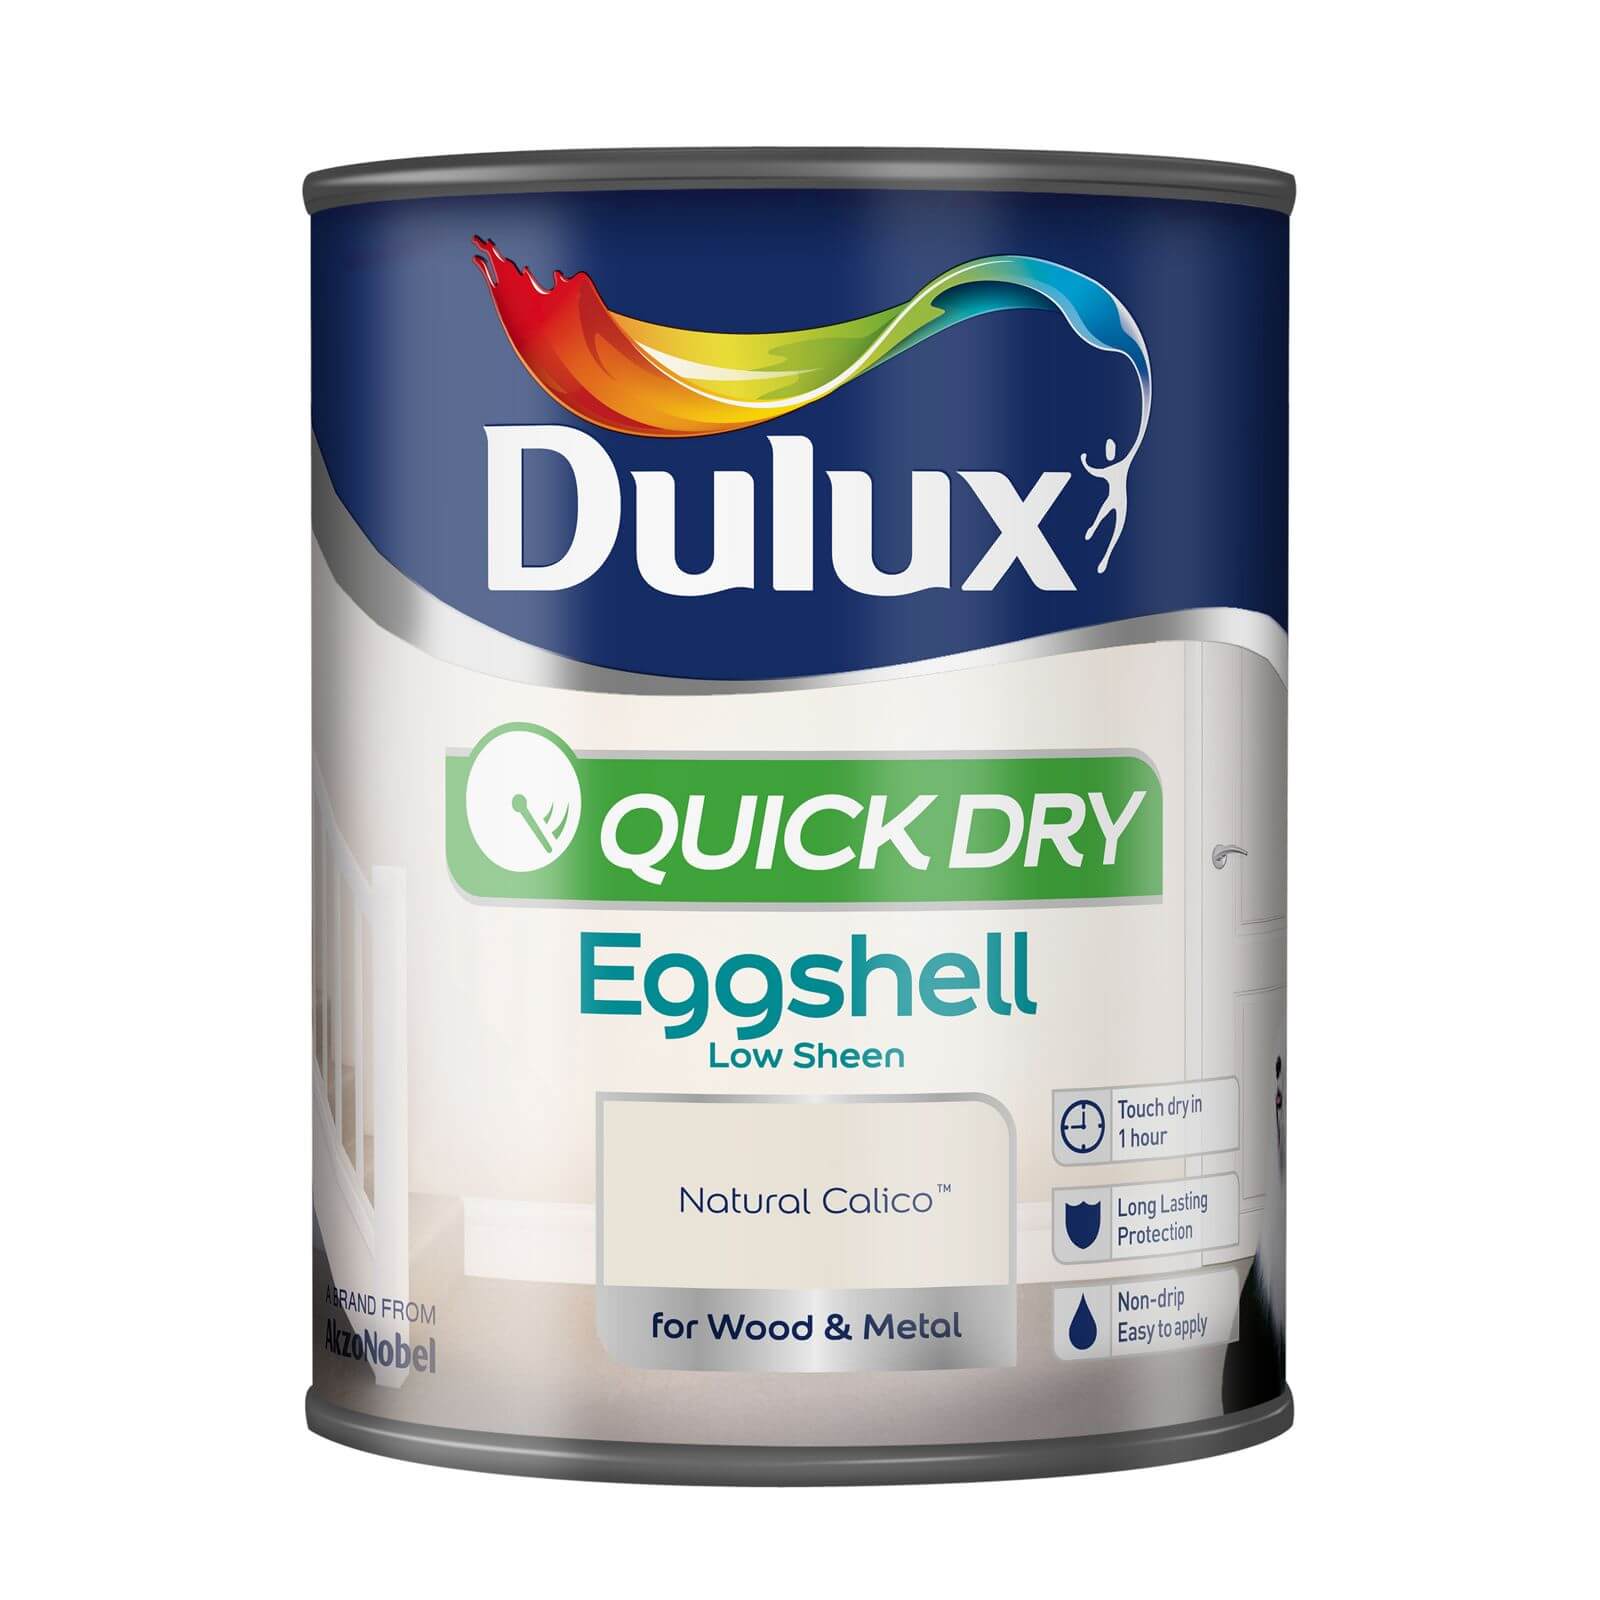 Dulux Quick Dry Eggshell Natural Calico - 750ml